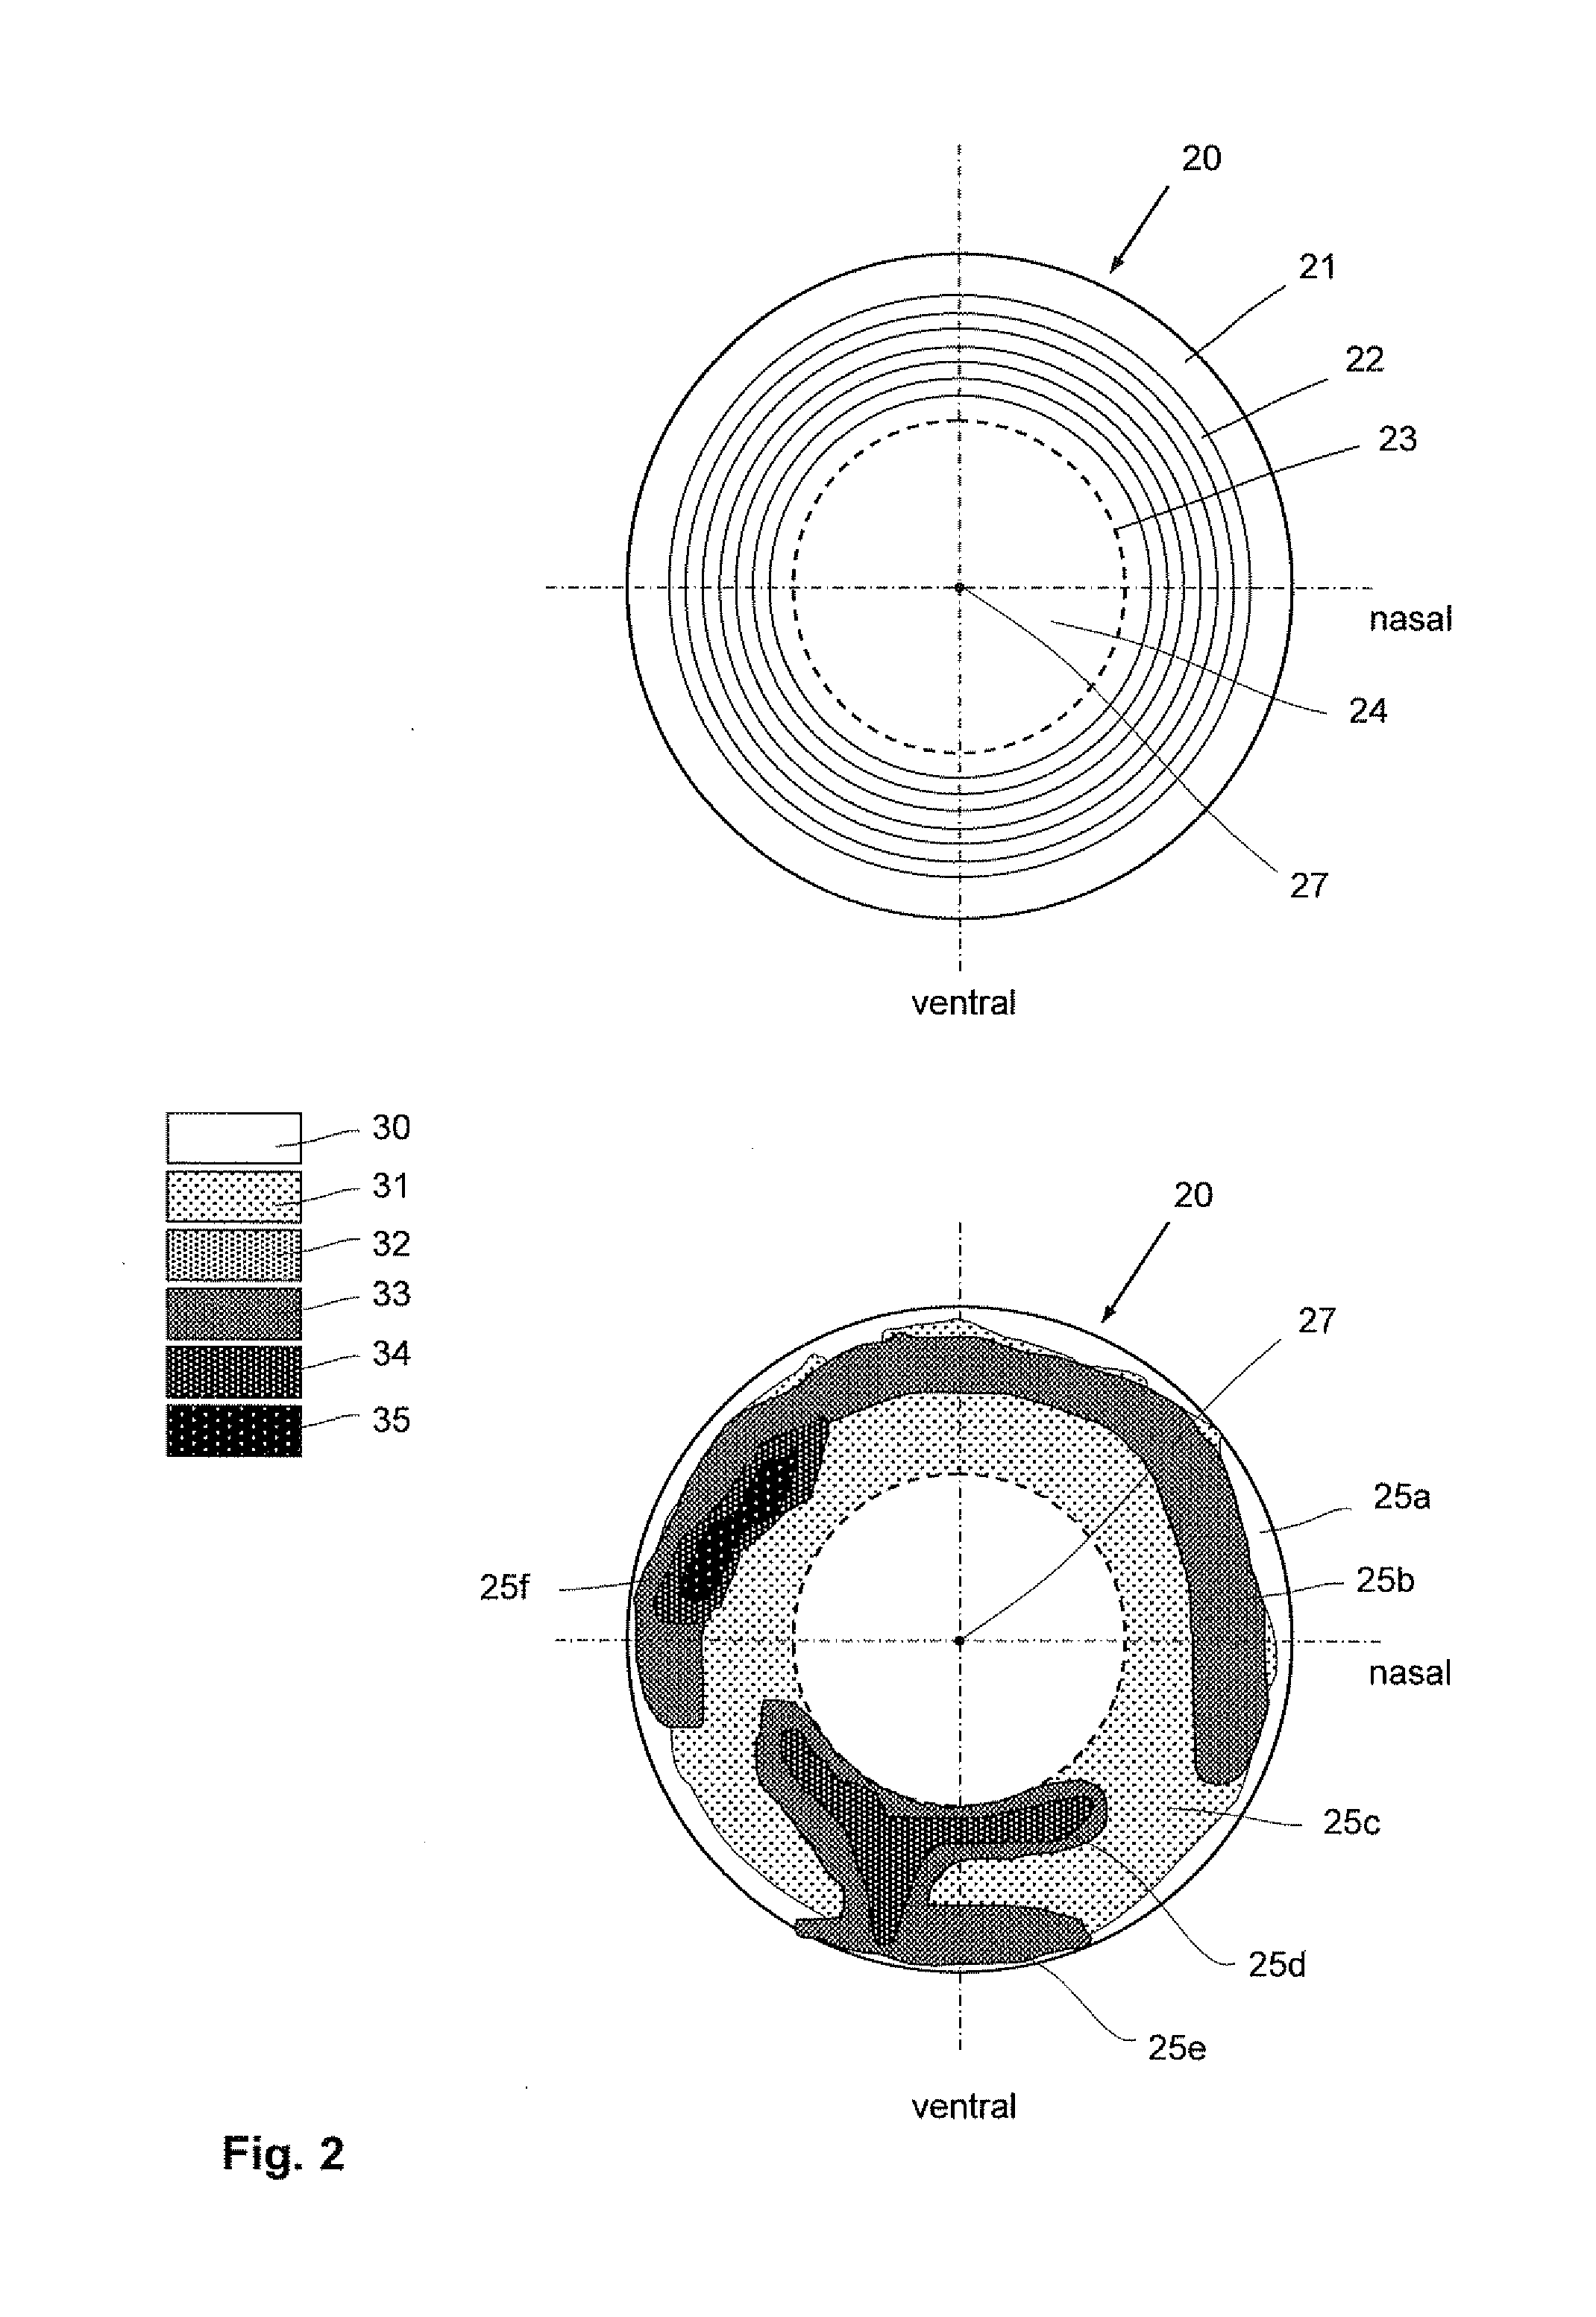 Laser therapy system for noninvasive correction of the refractive system of the eye